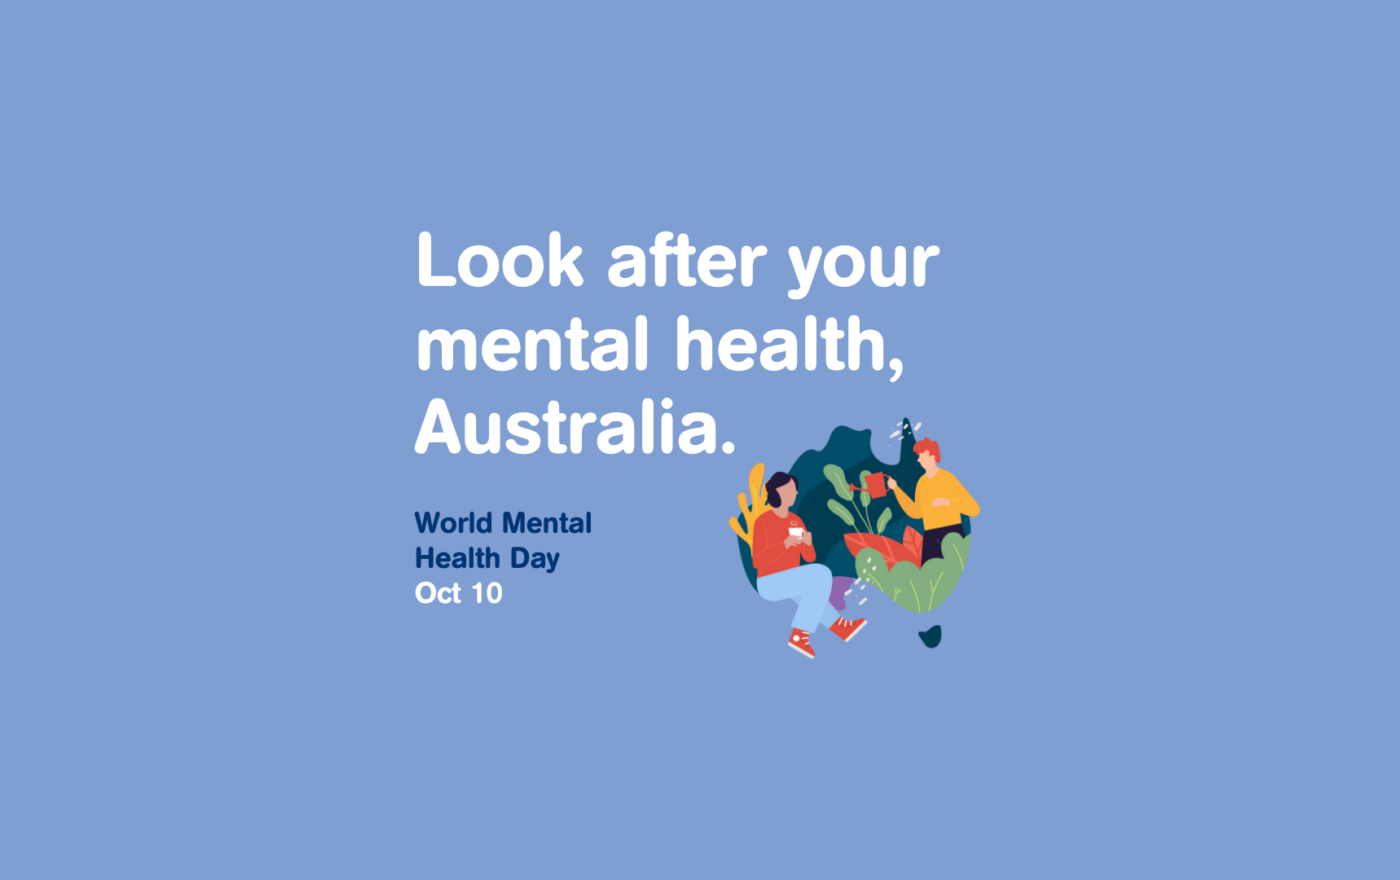 Copy of Look after your mental health Australia 1920 1080px